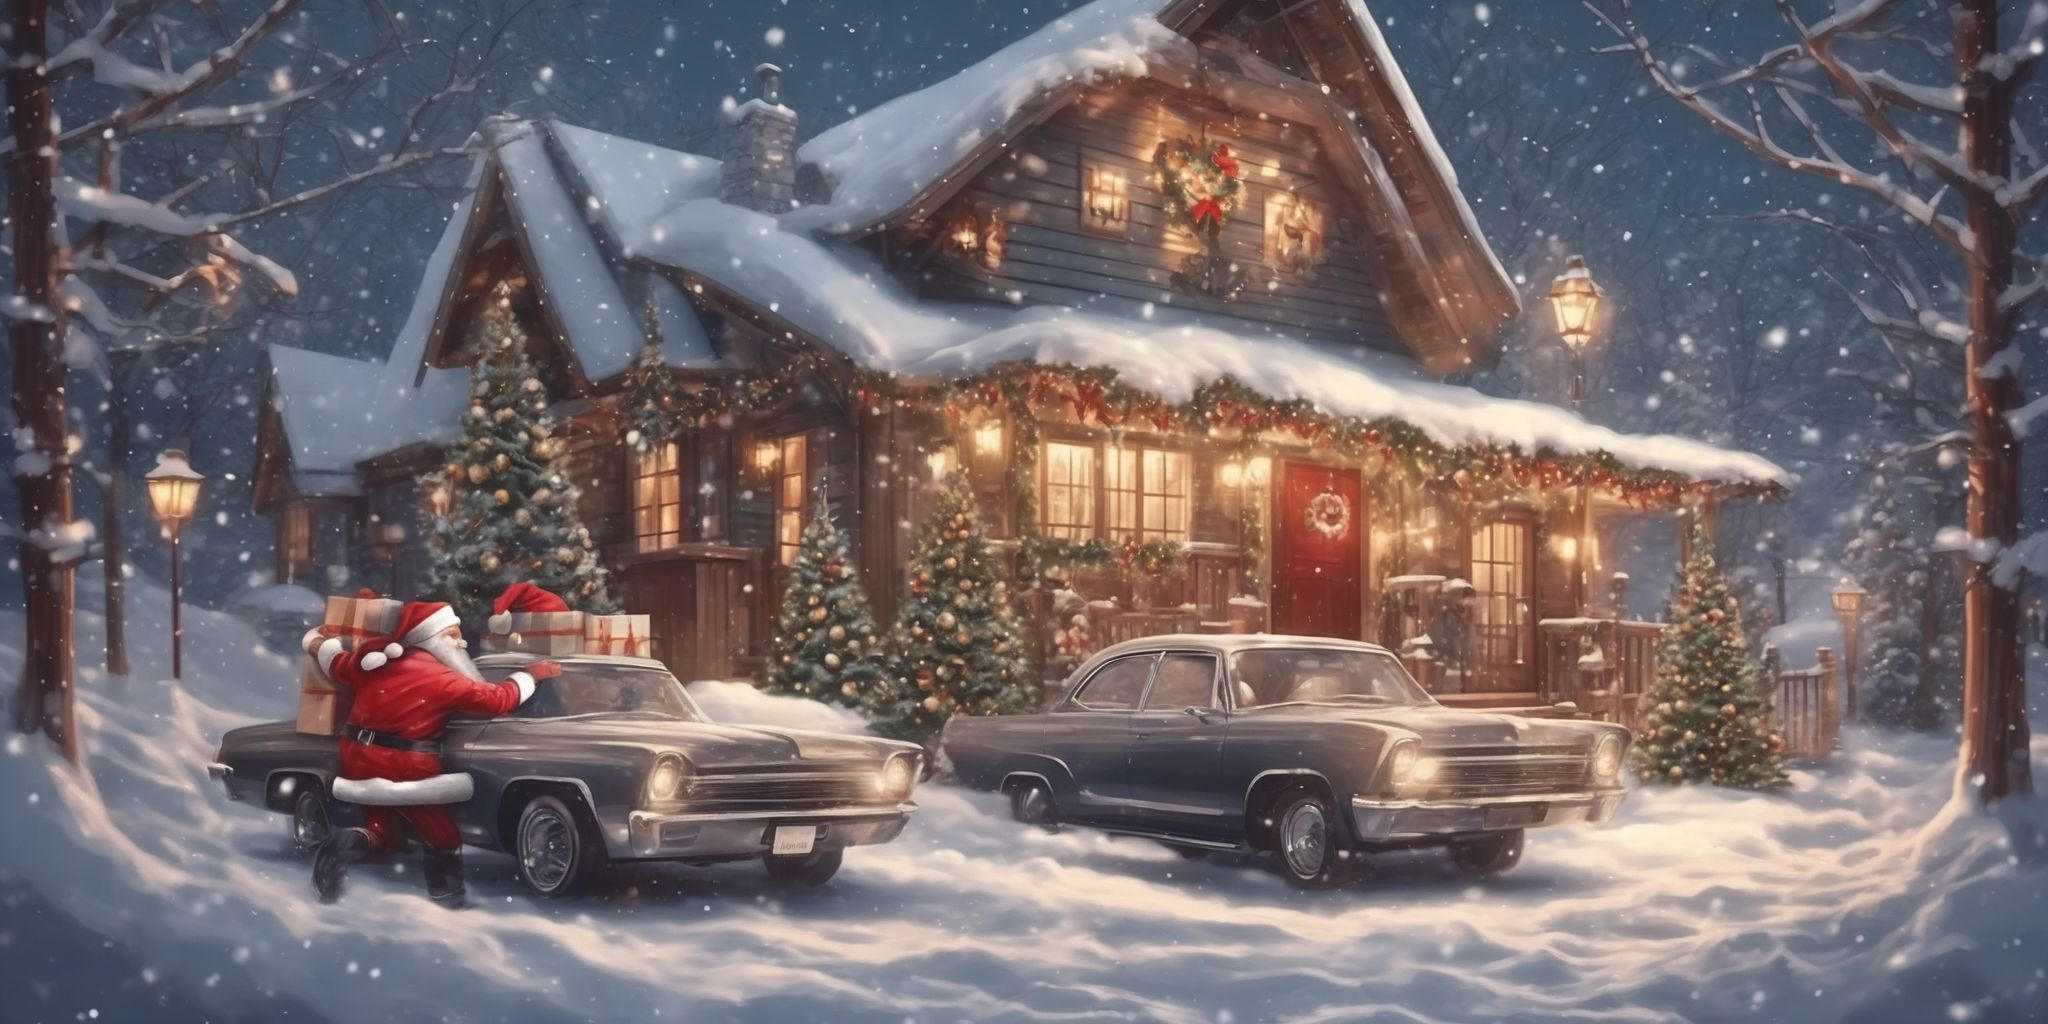 Getaway in realistic Christmas style